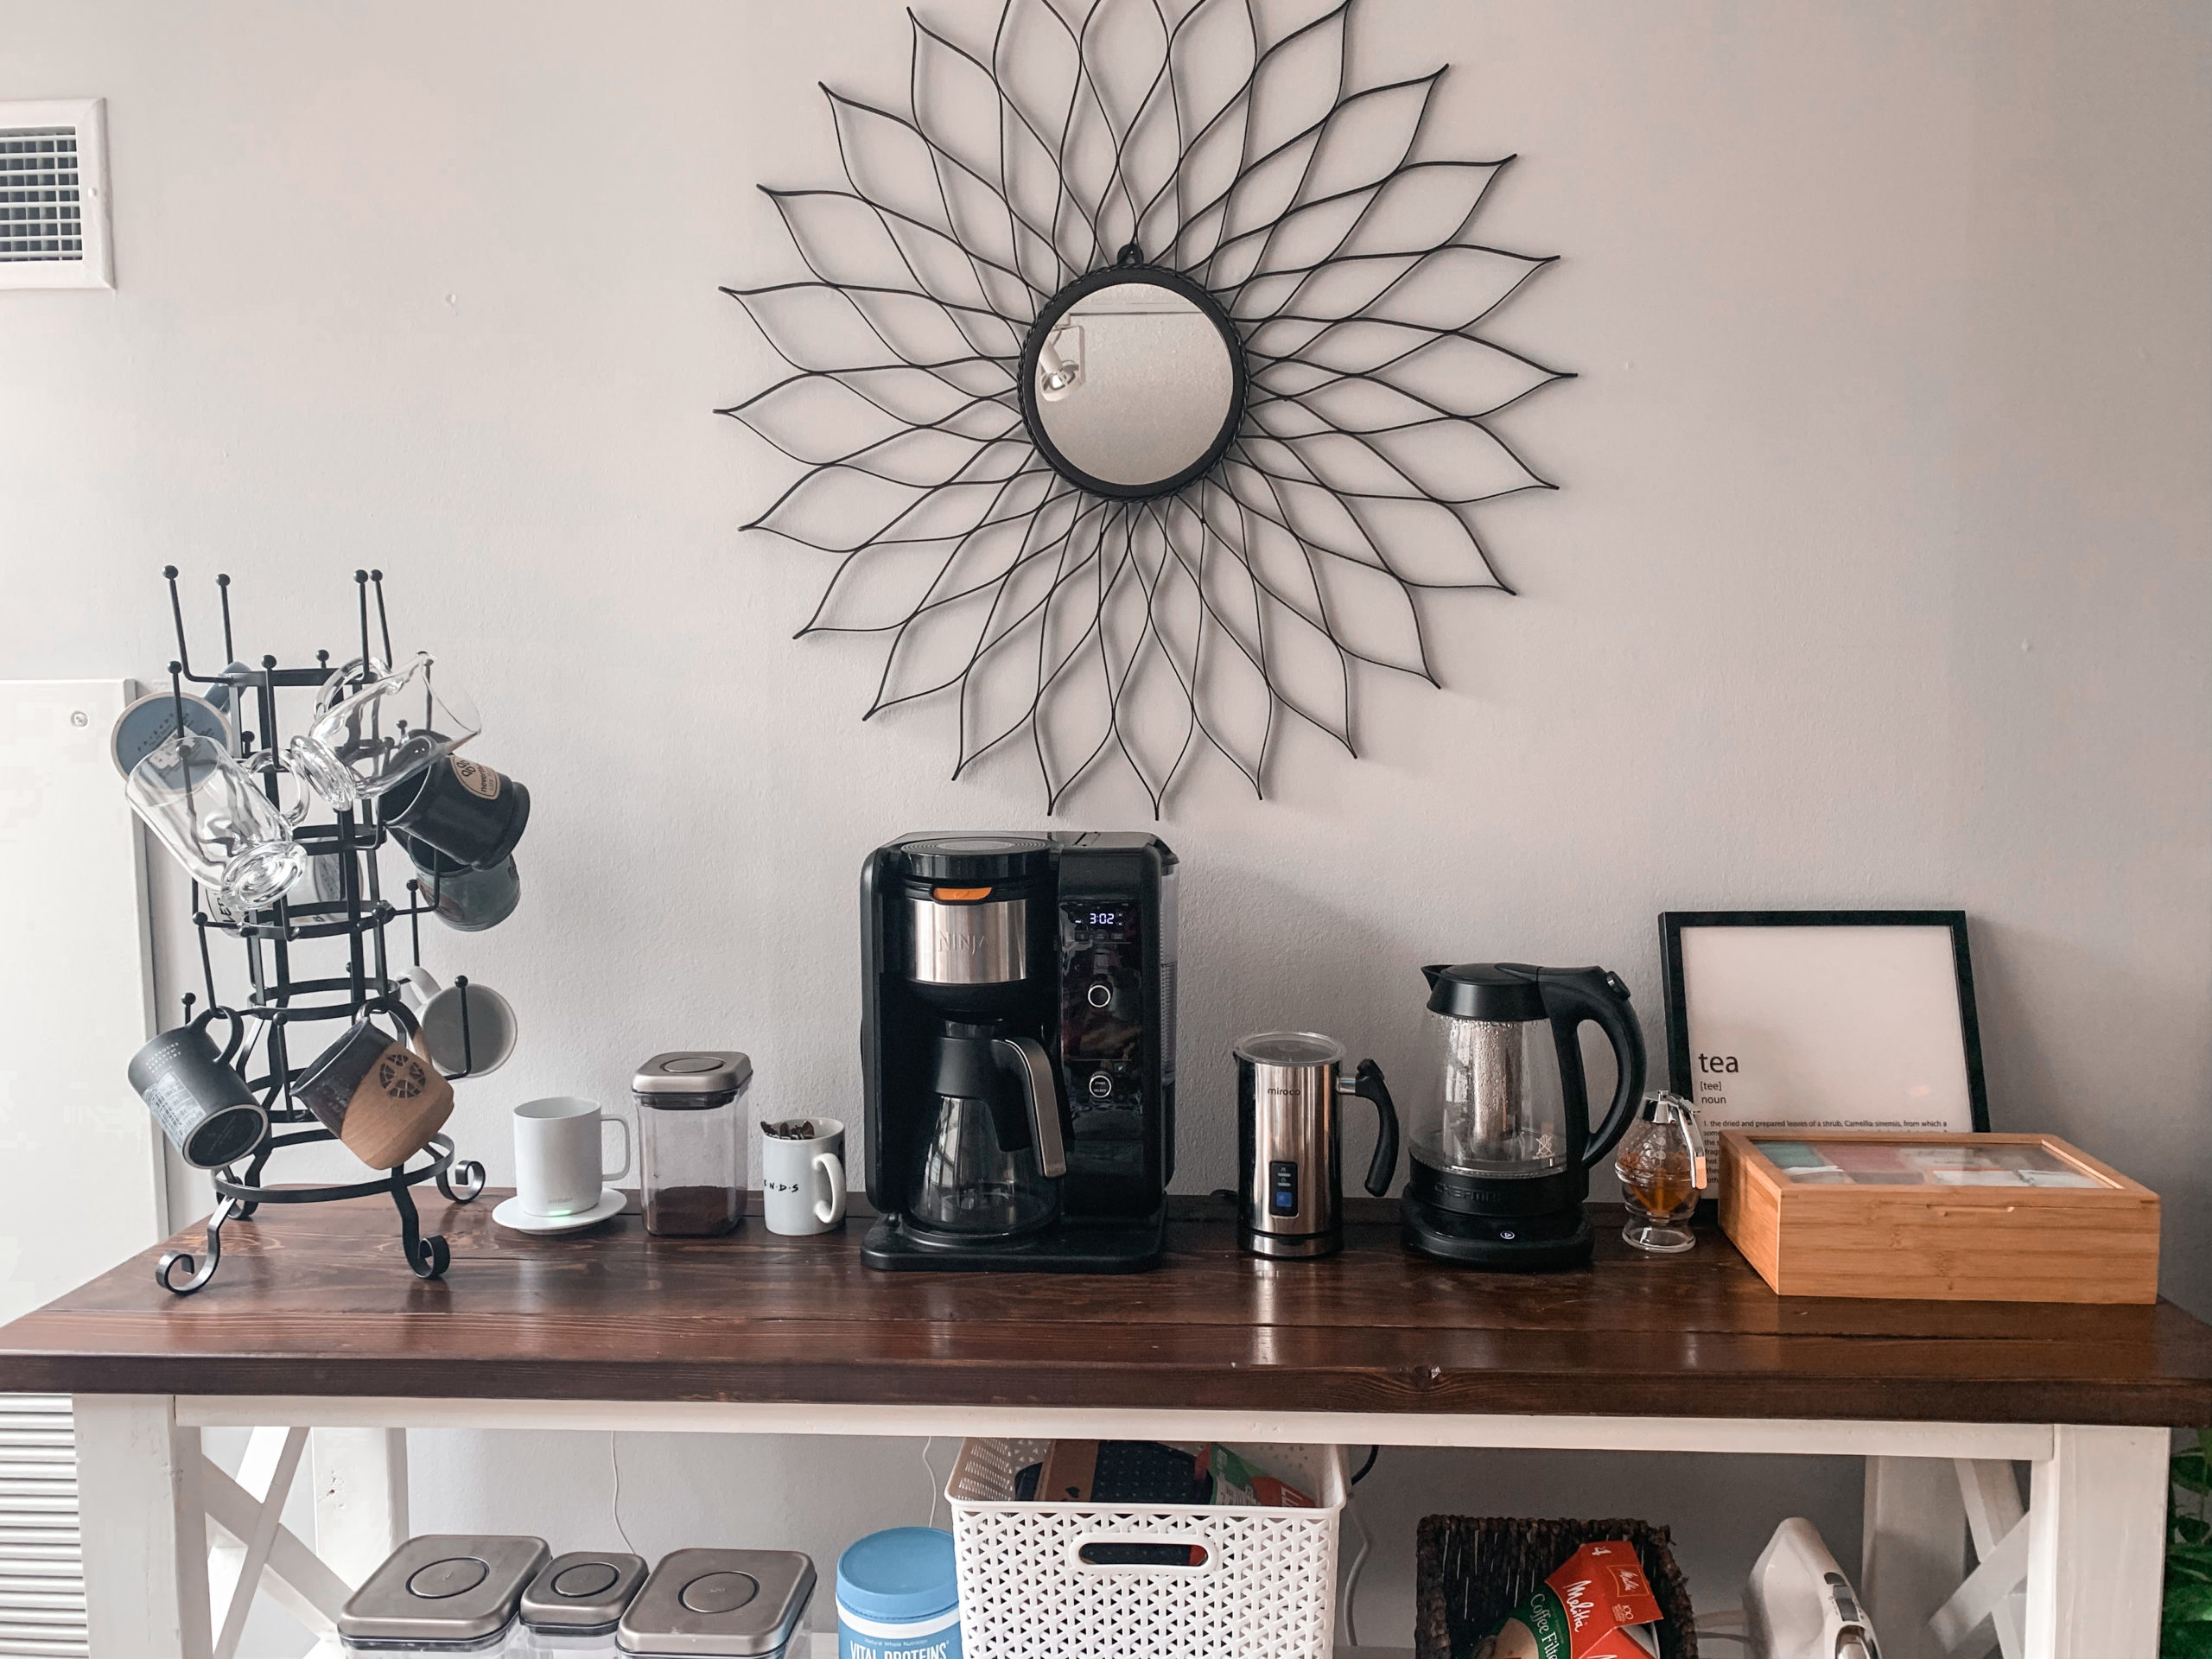 Coffee bar with coffee maker, tea kettle, milk frother, and mug tree.